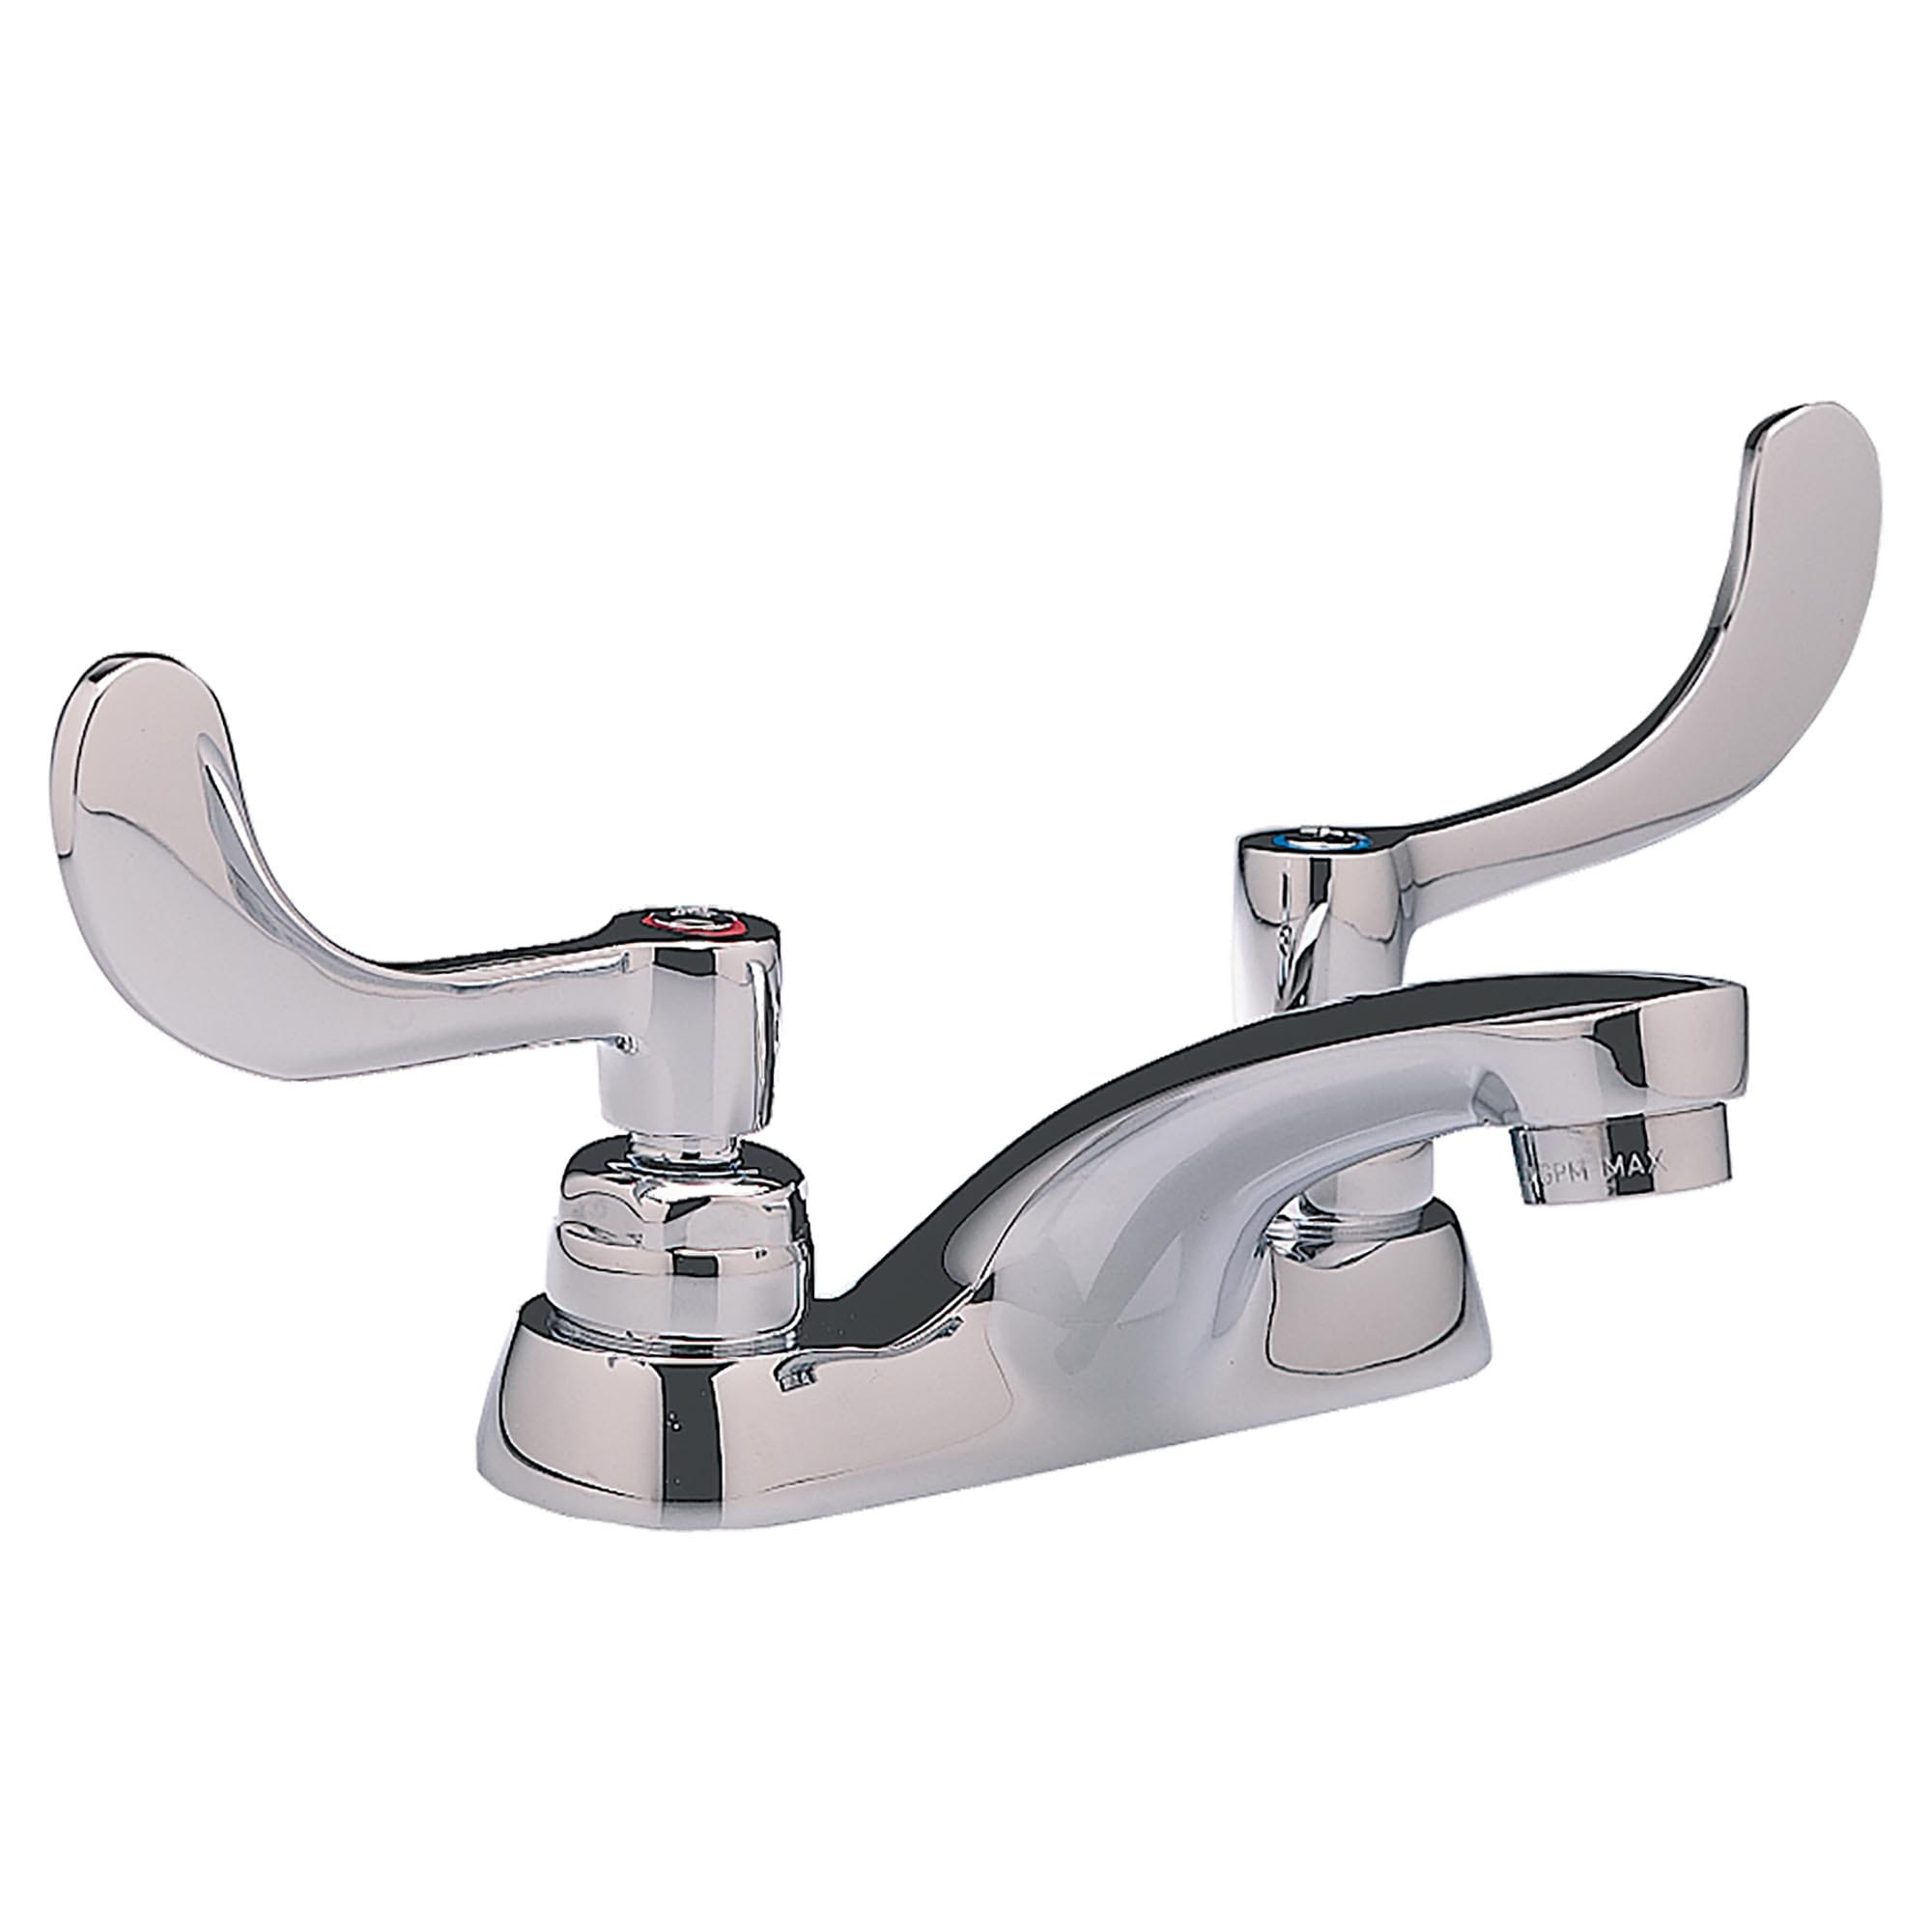 Monterrey® 4-Inch Centerset Cast Faucet With Wrist Blade Handles 1.5 gpm/5.7 Lpm With Grid Drain